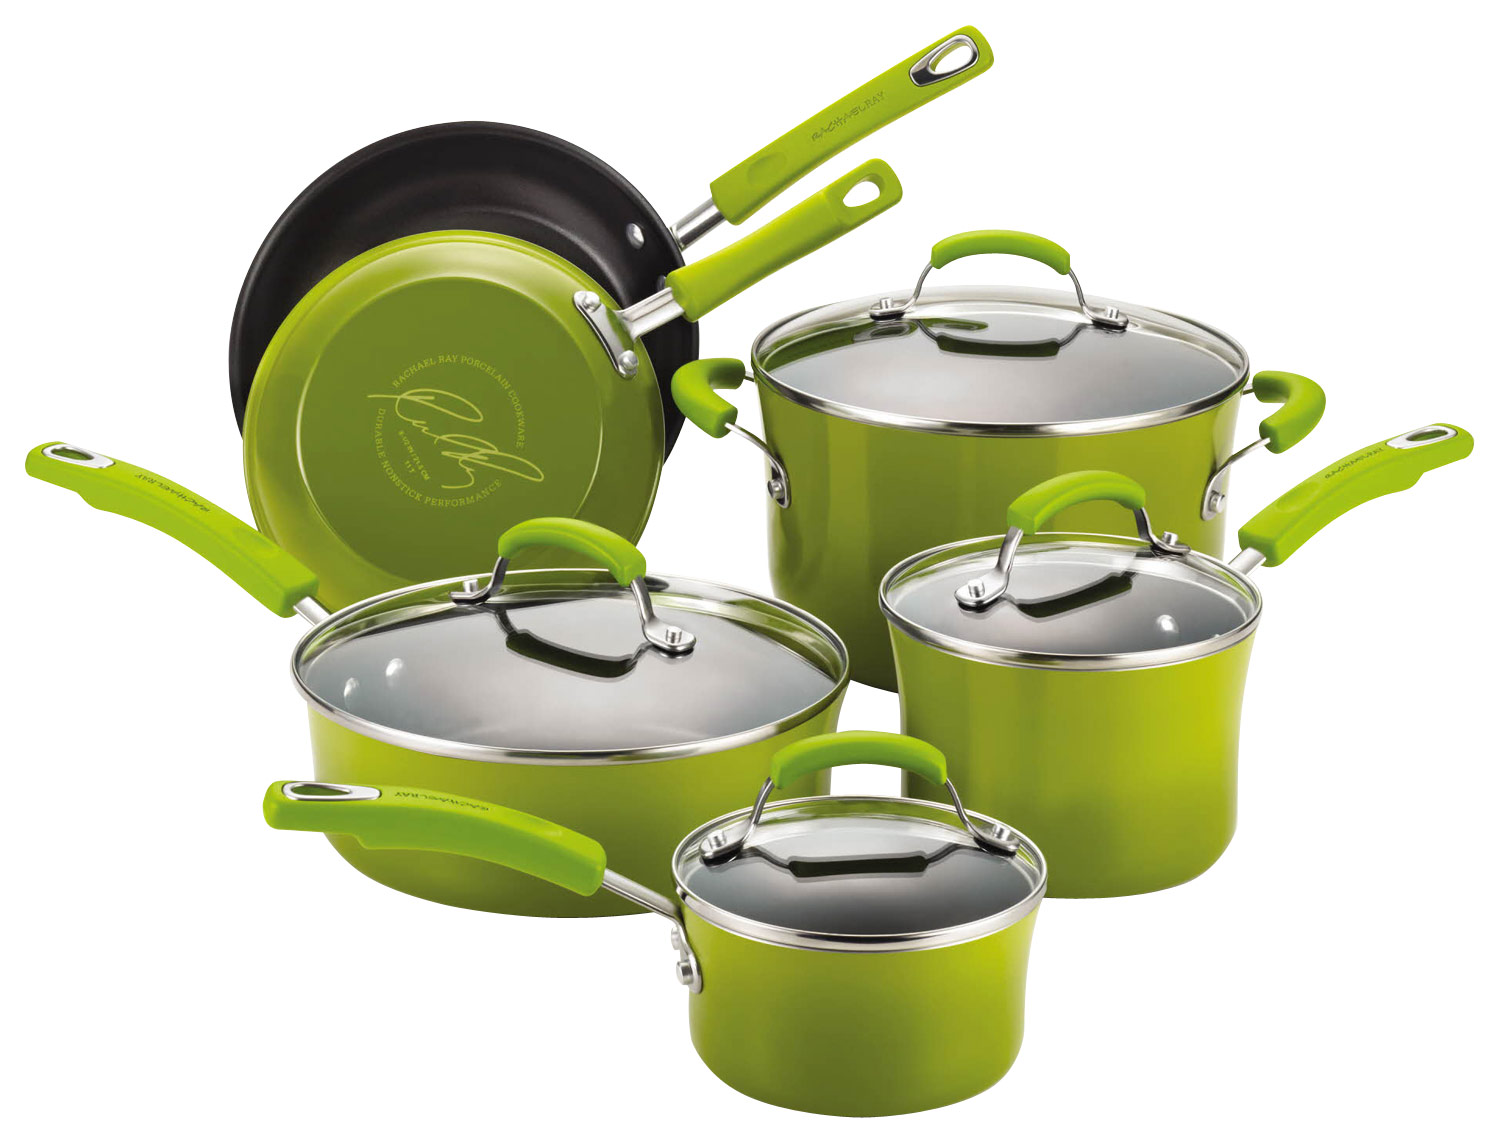 CAROTE 12pcs Nonstick Cookware Set, Heavy-duty Pots and Pans Set, Induction  Kitchen Pans for Cooking, Garden Green Cooking Pot